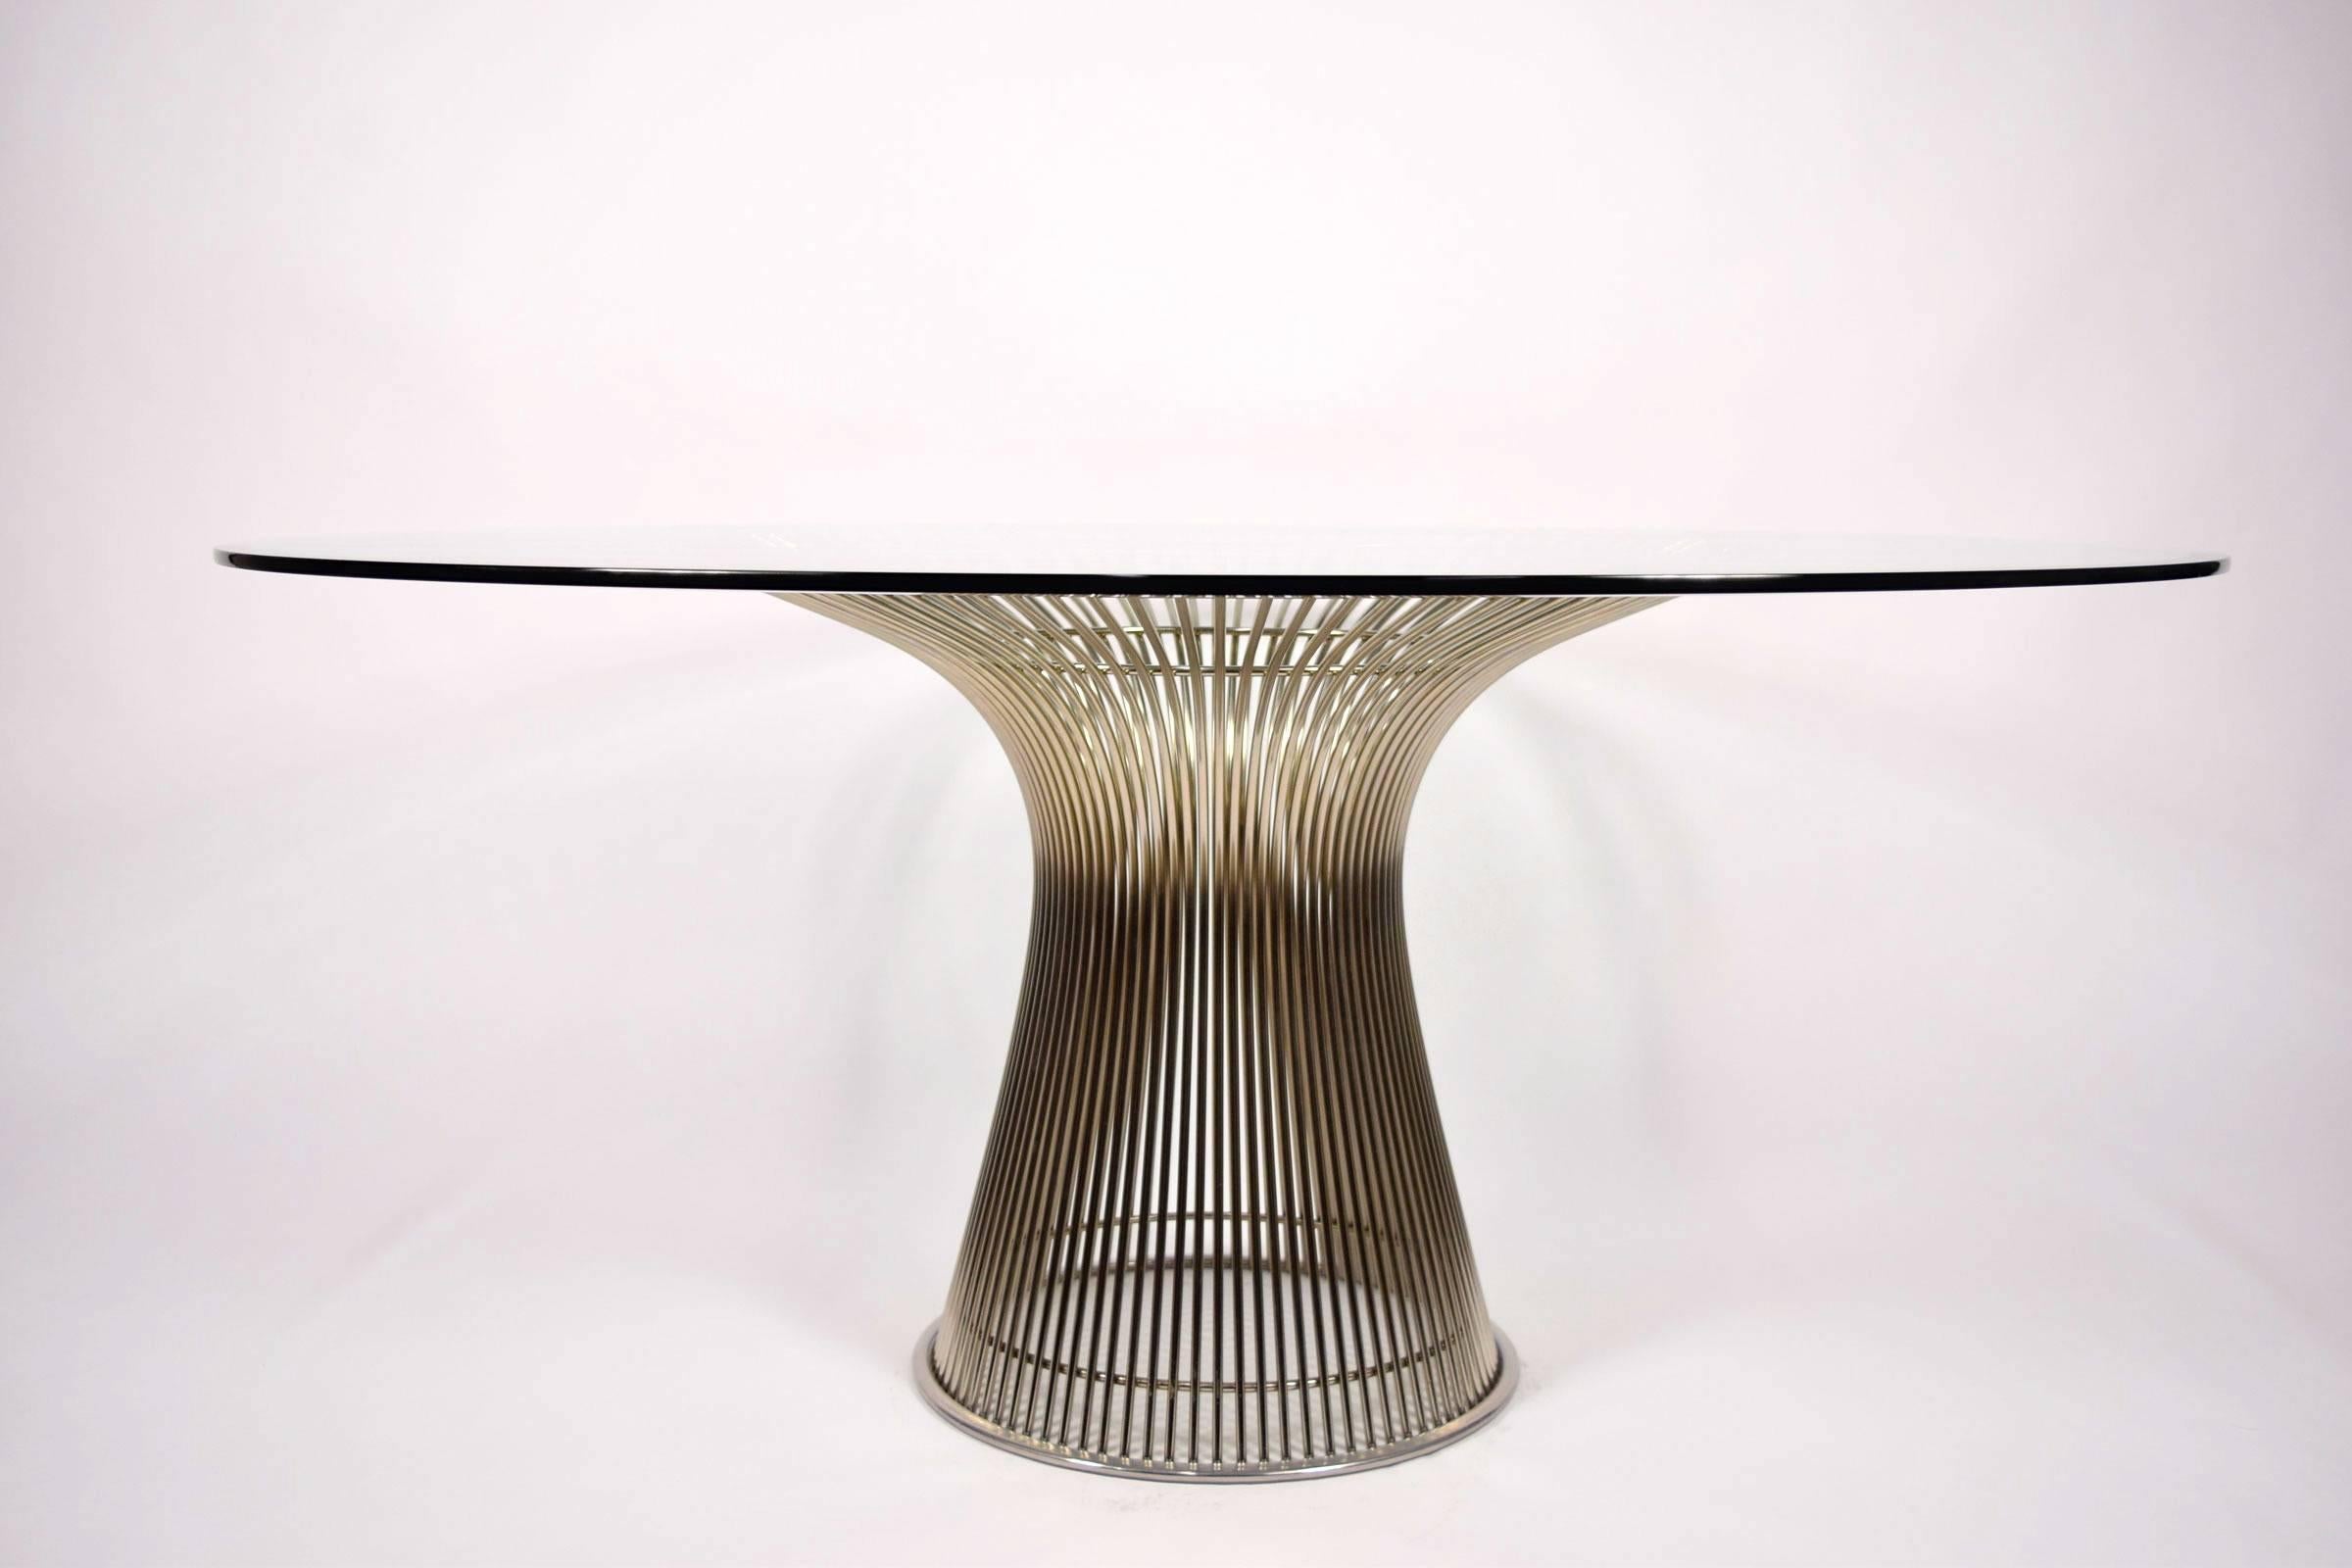 Dining table by Warren Platner for Knoll. Table has nickel-plated steel base. It is shown with a 60